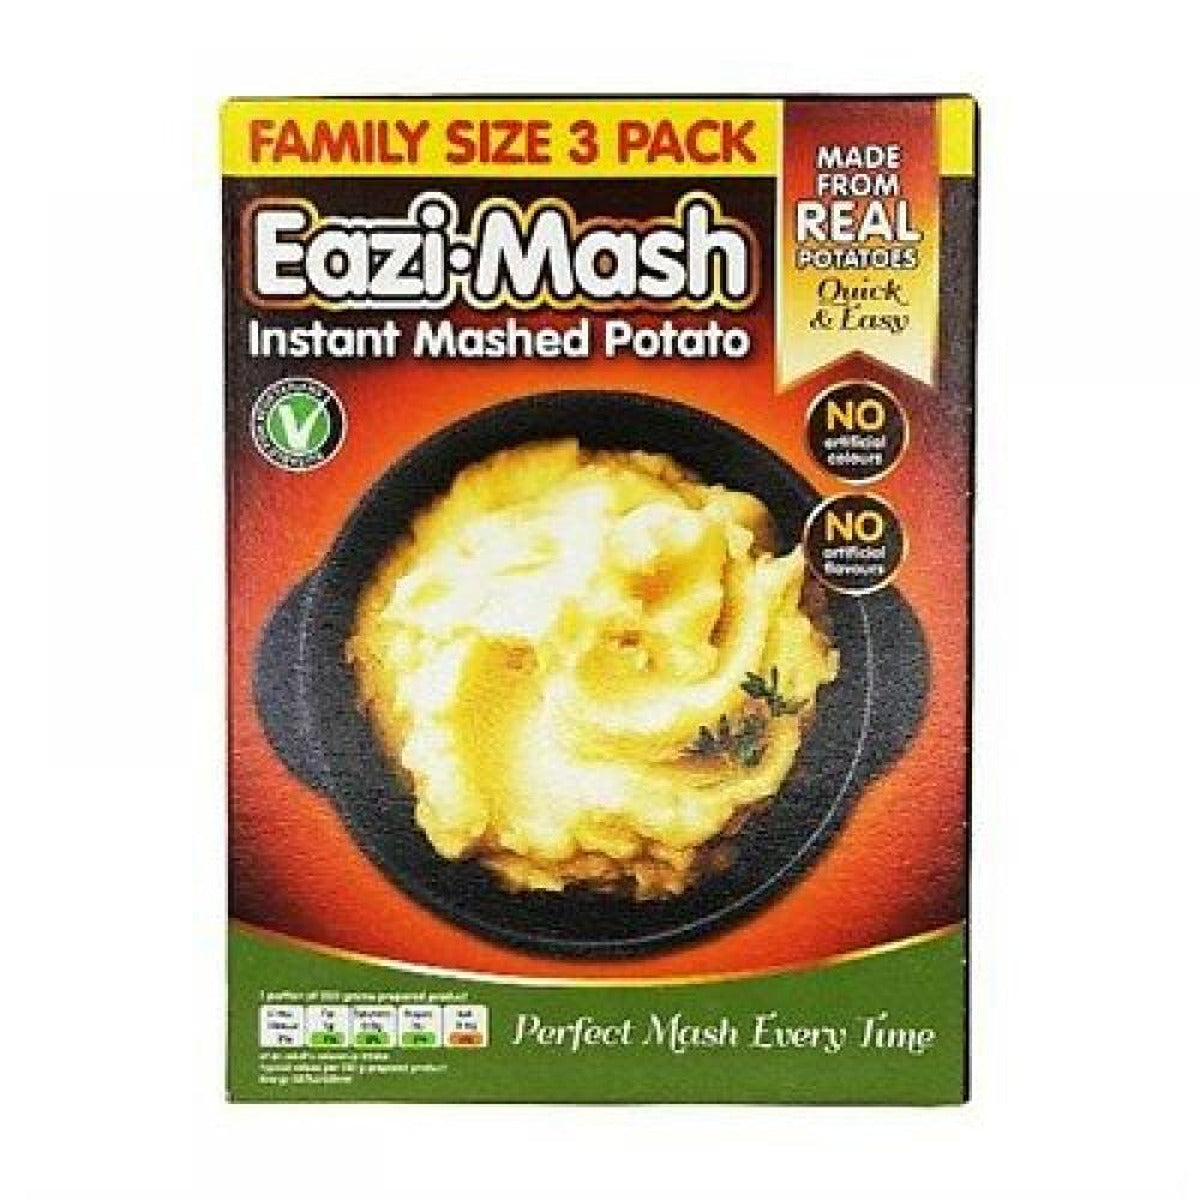 A package of Eazi Mash - Instant Mash Potato - 3 x 100g from the brand Eazi.